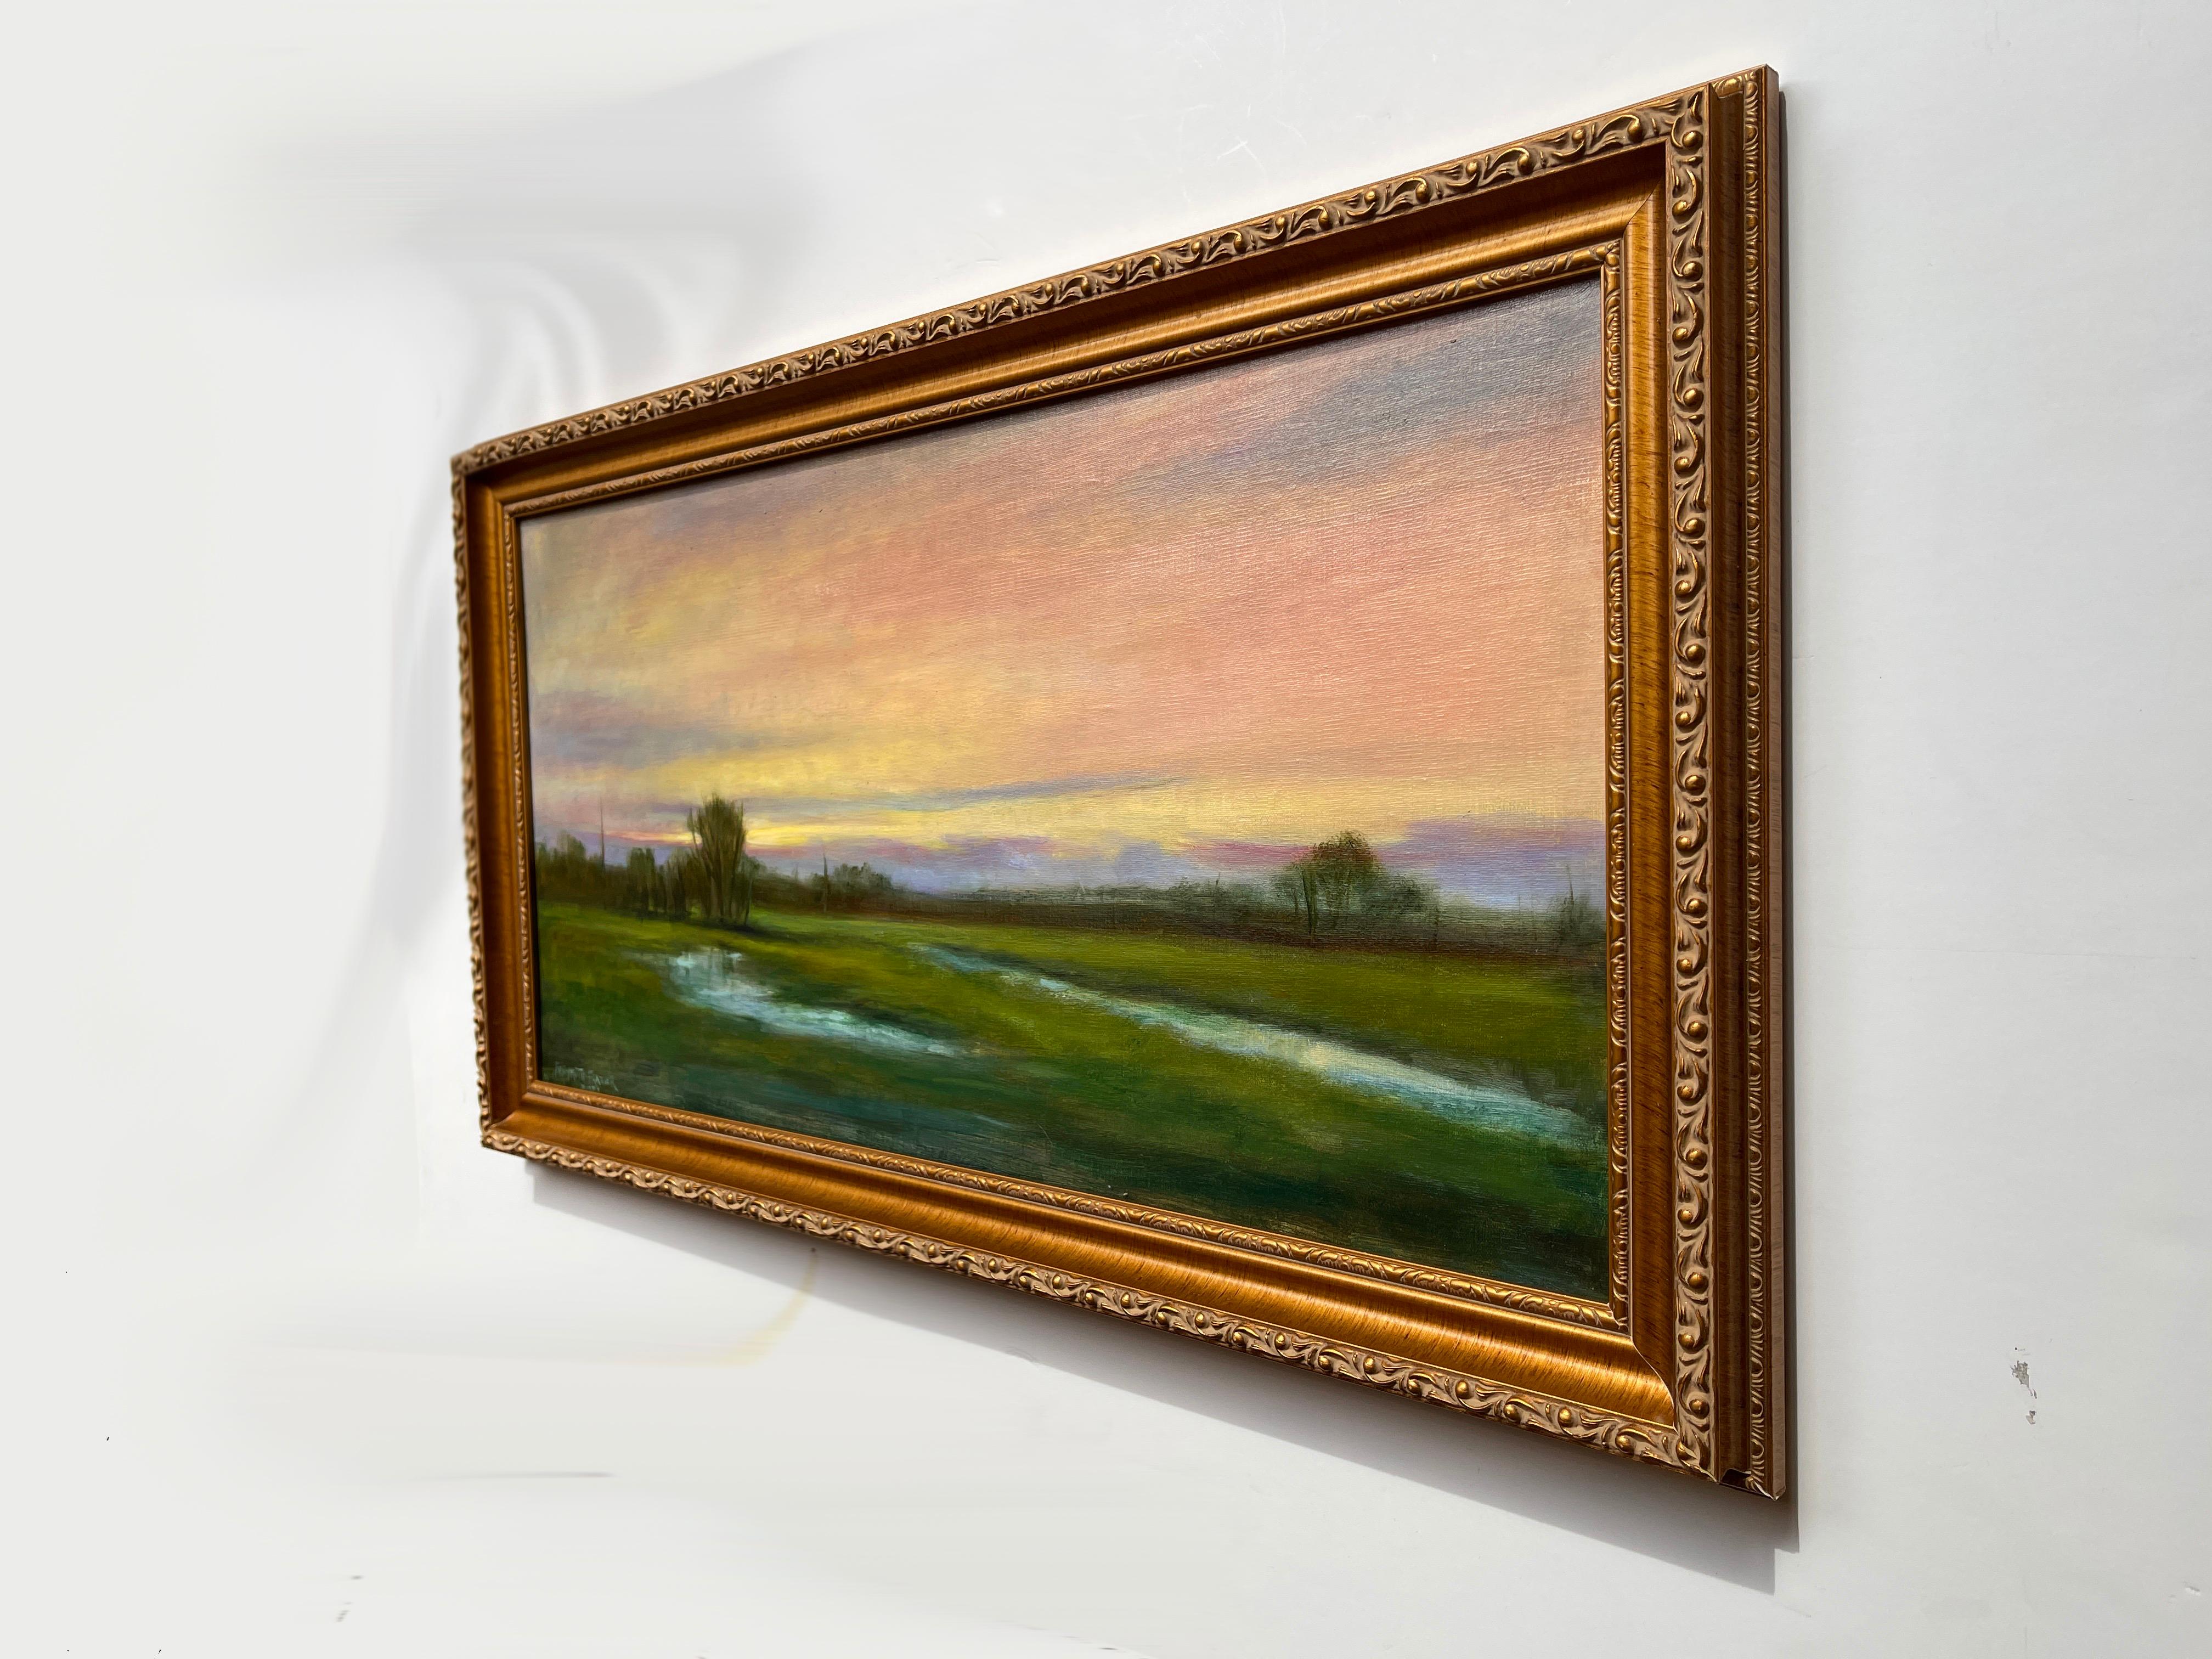 Hand-Painted Wetlands, Reflective Marsh on a Spring Sky, Soft Romantic Colors, Original Oil